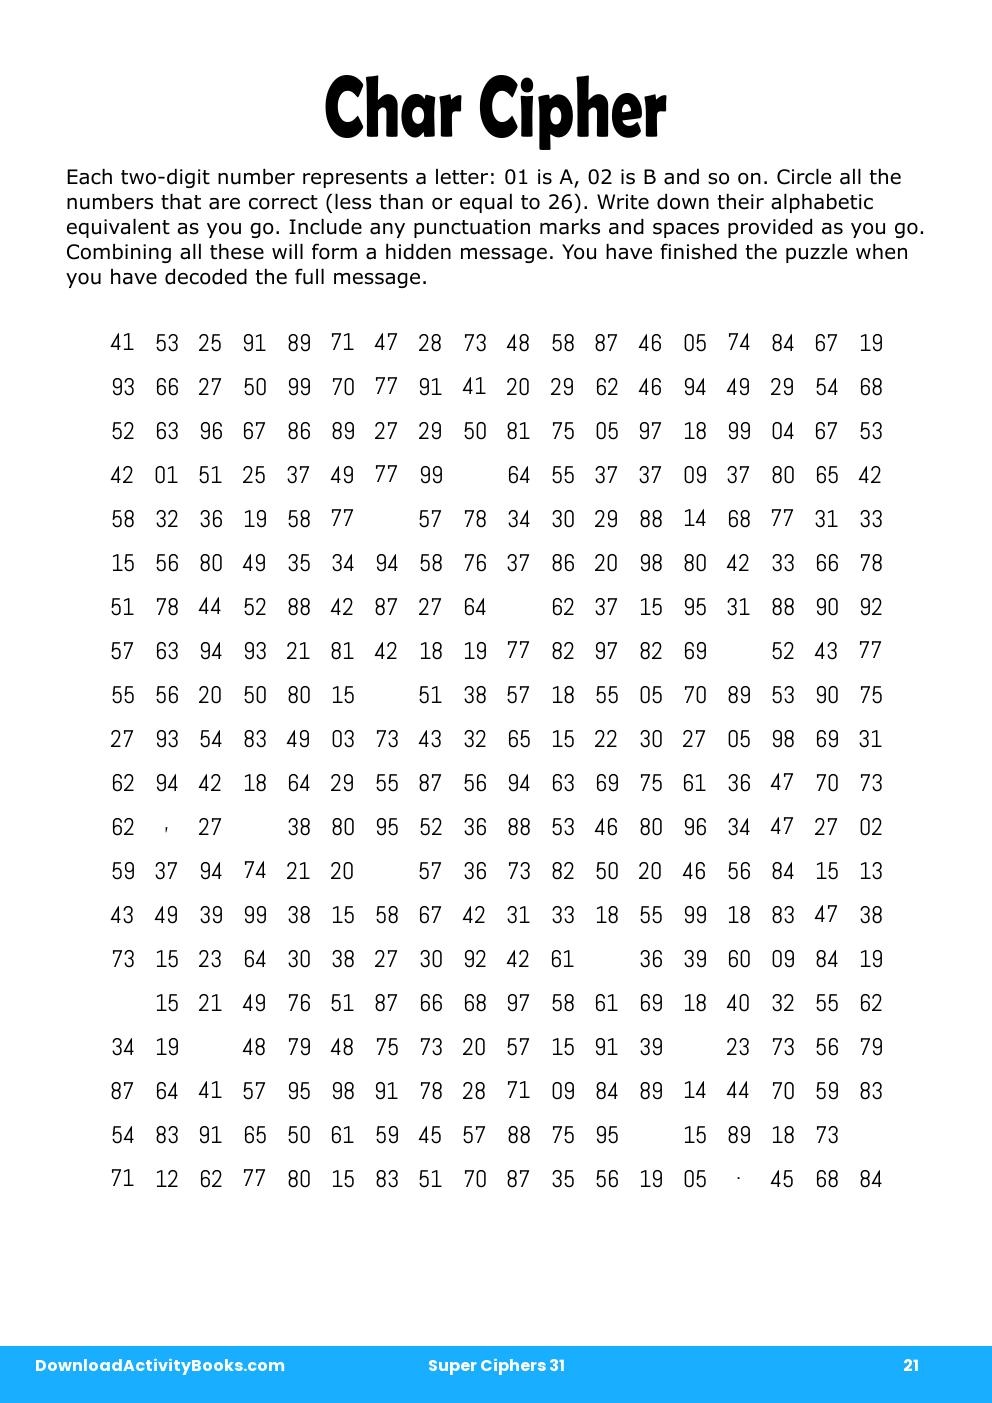 Char Cipher in Super Ciphers 31